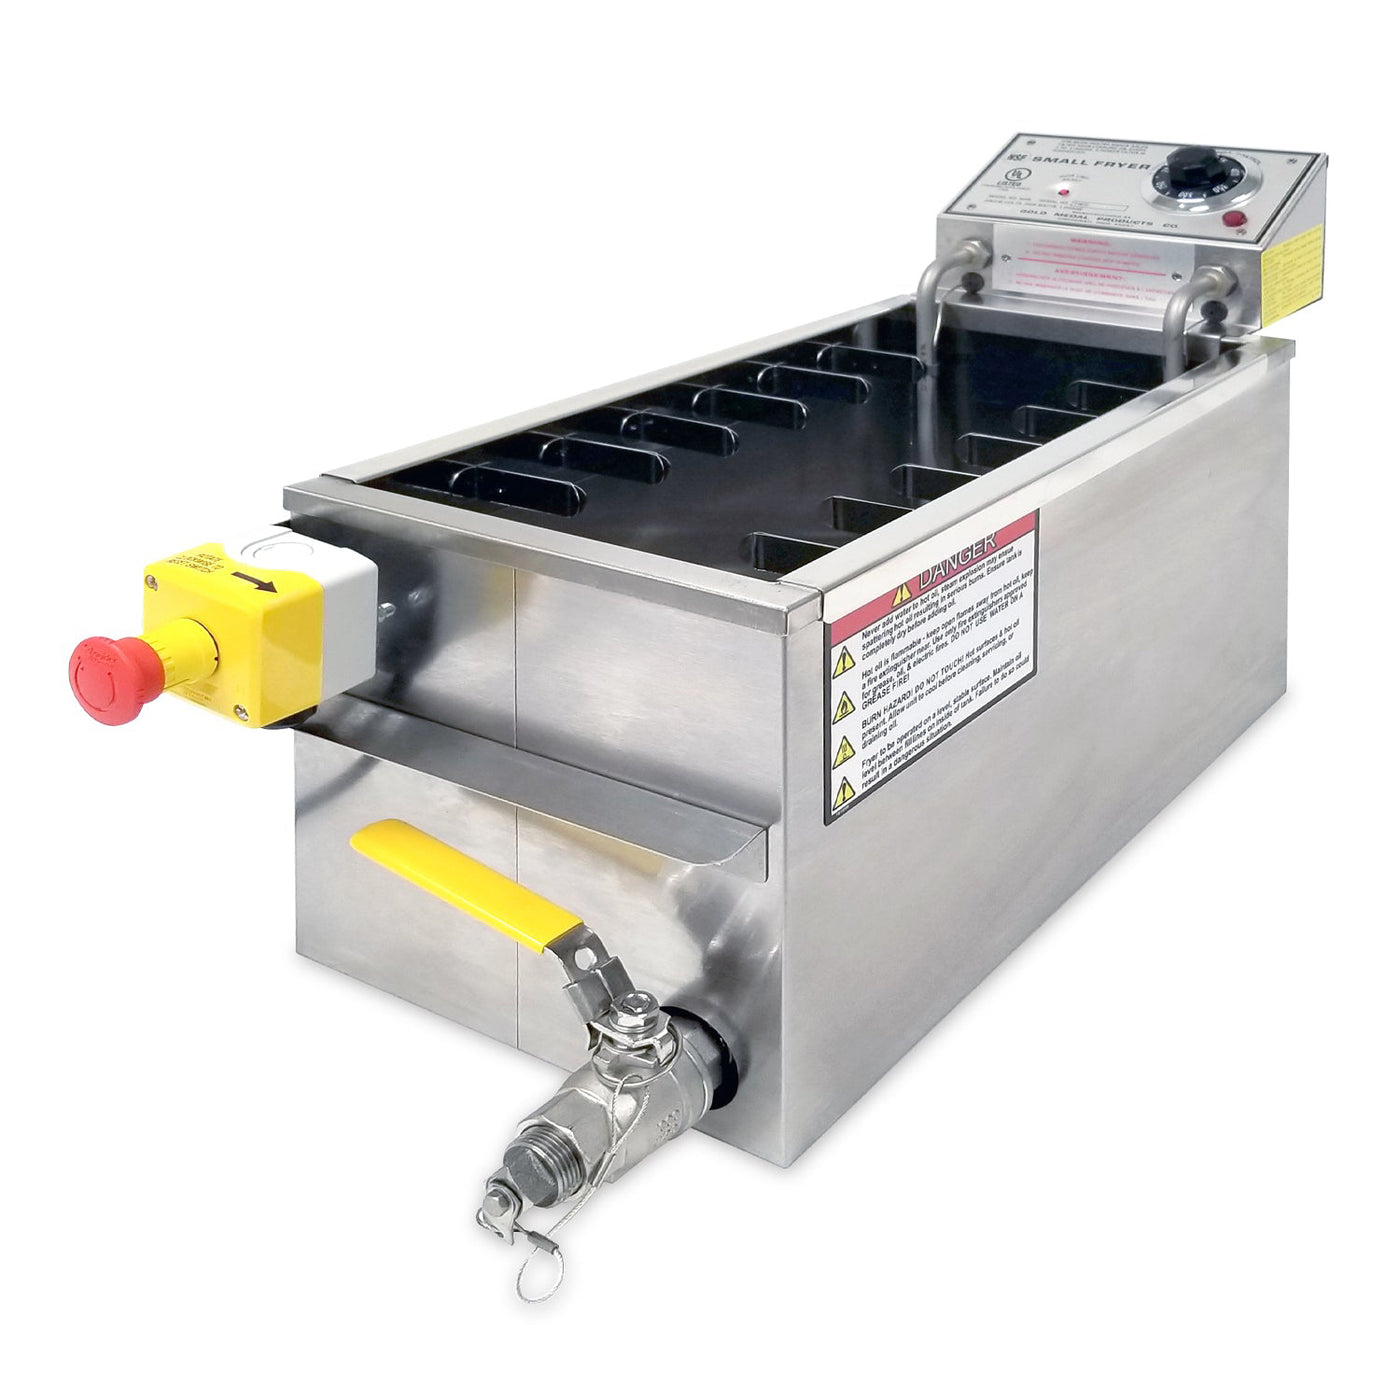 Single Large Fry Basket for #8048D/#8047D Small Fryers and #8073 King 9  Fryer (for 1.5 lb. of fries)